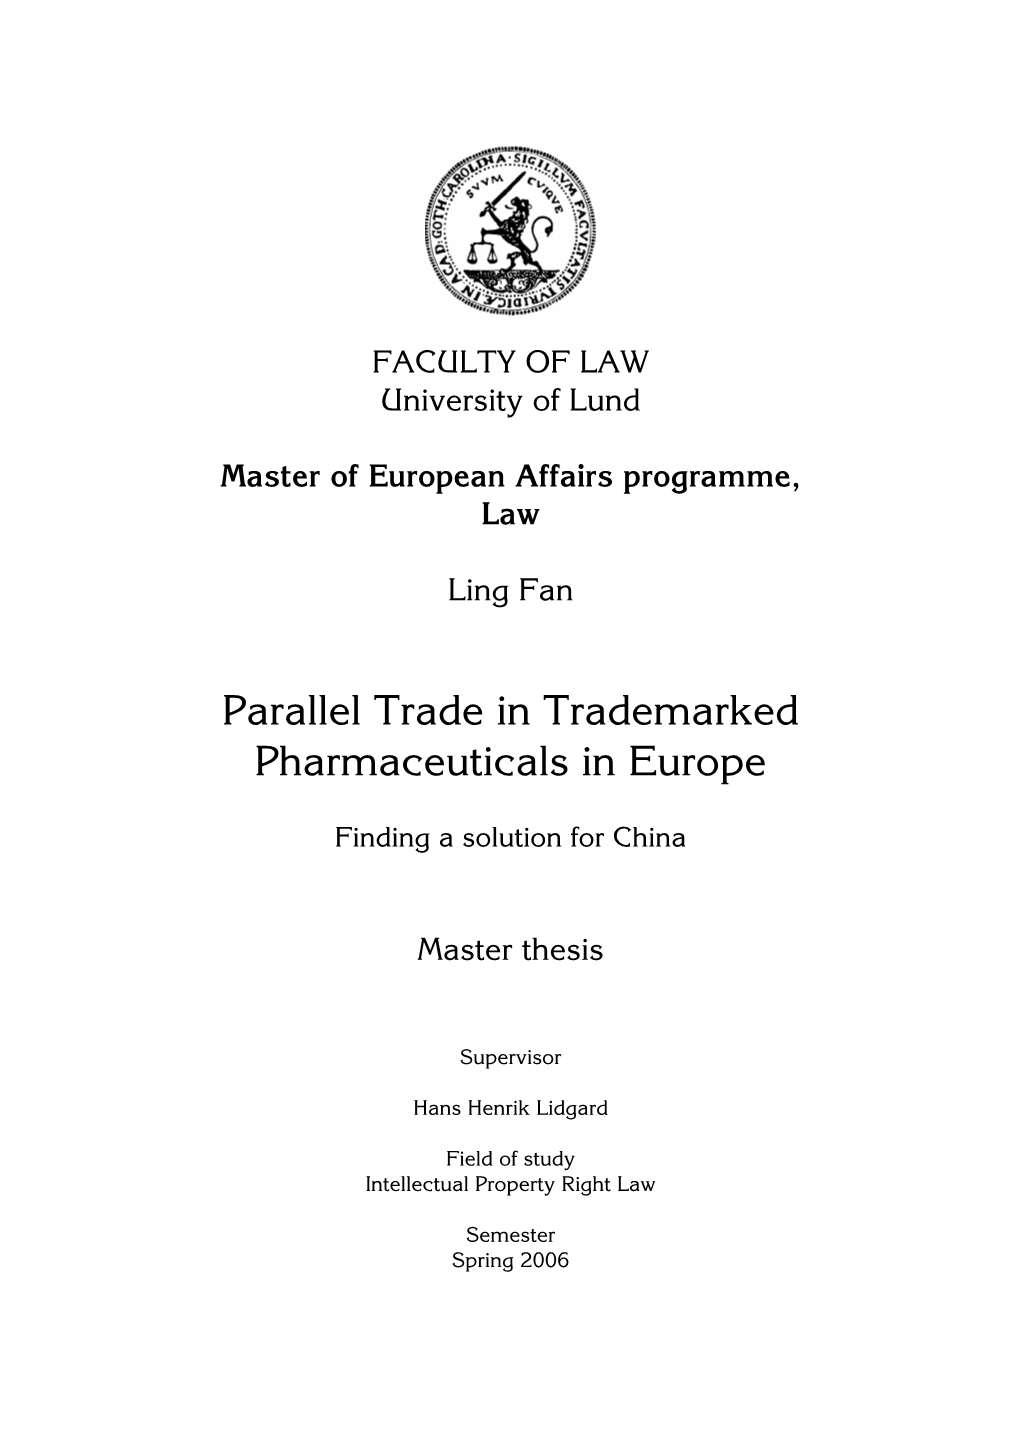 Parallel Trade in Trademarked Pharmaceuticals in Europe